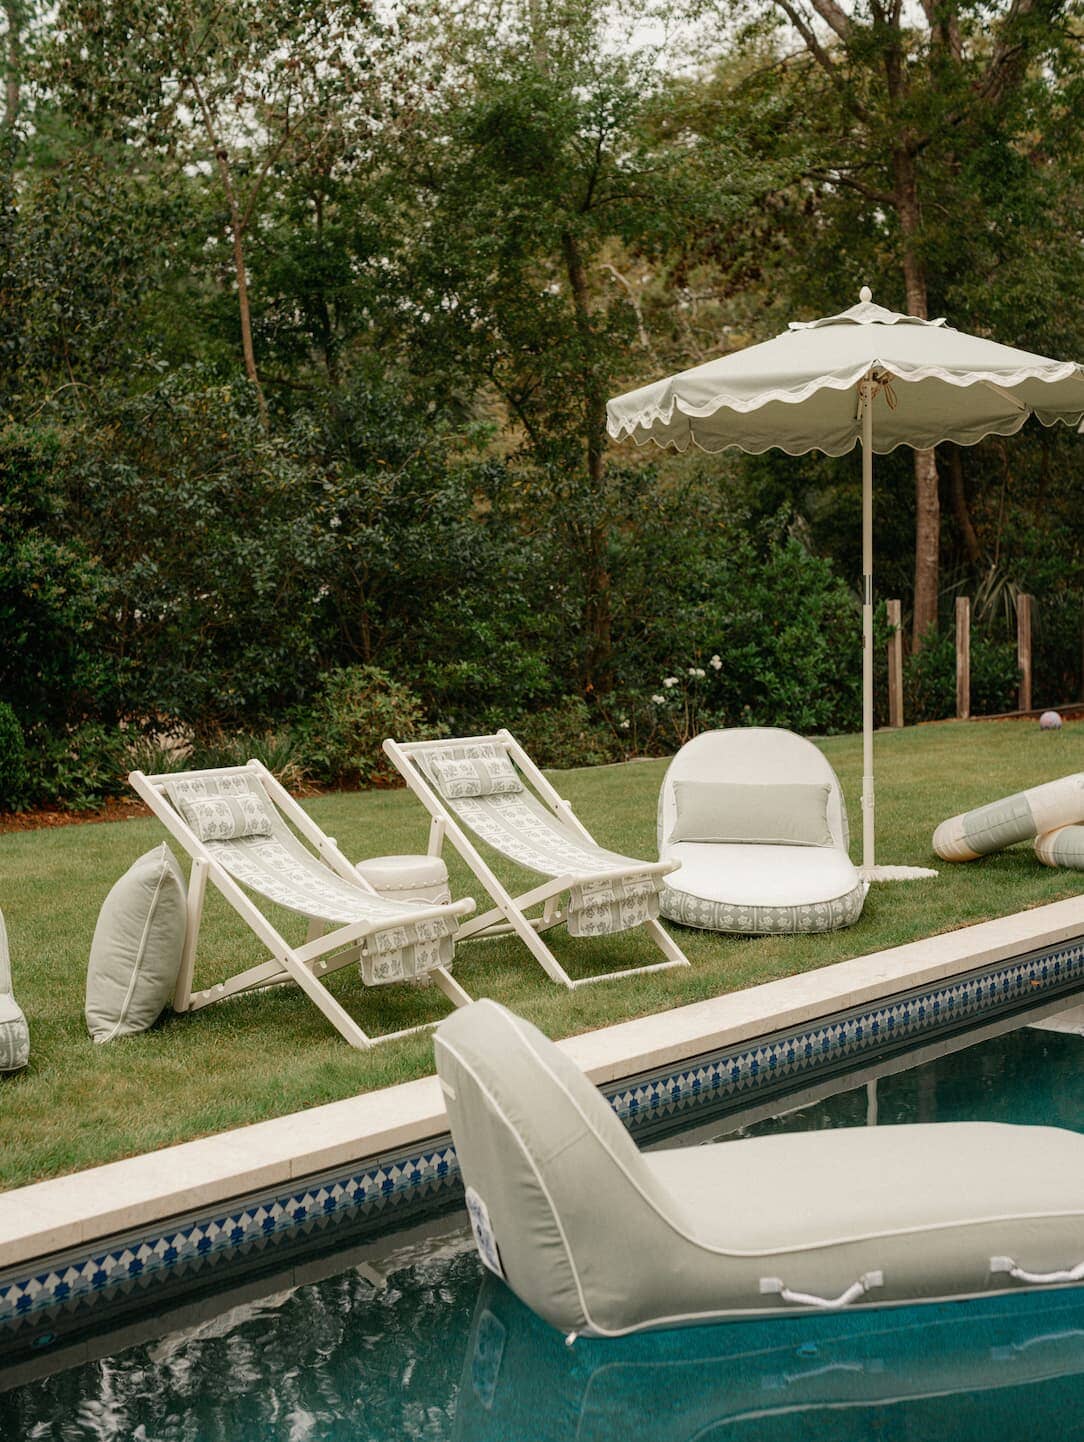 Sling chairs, and umbrella on the grass next to a pool